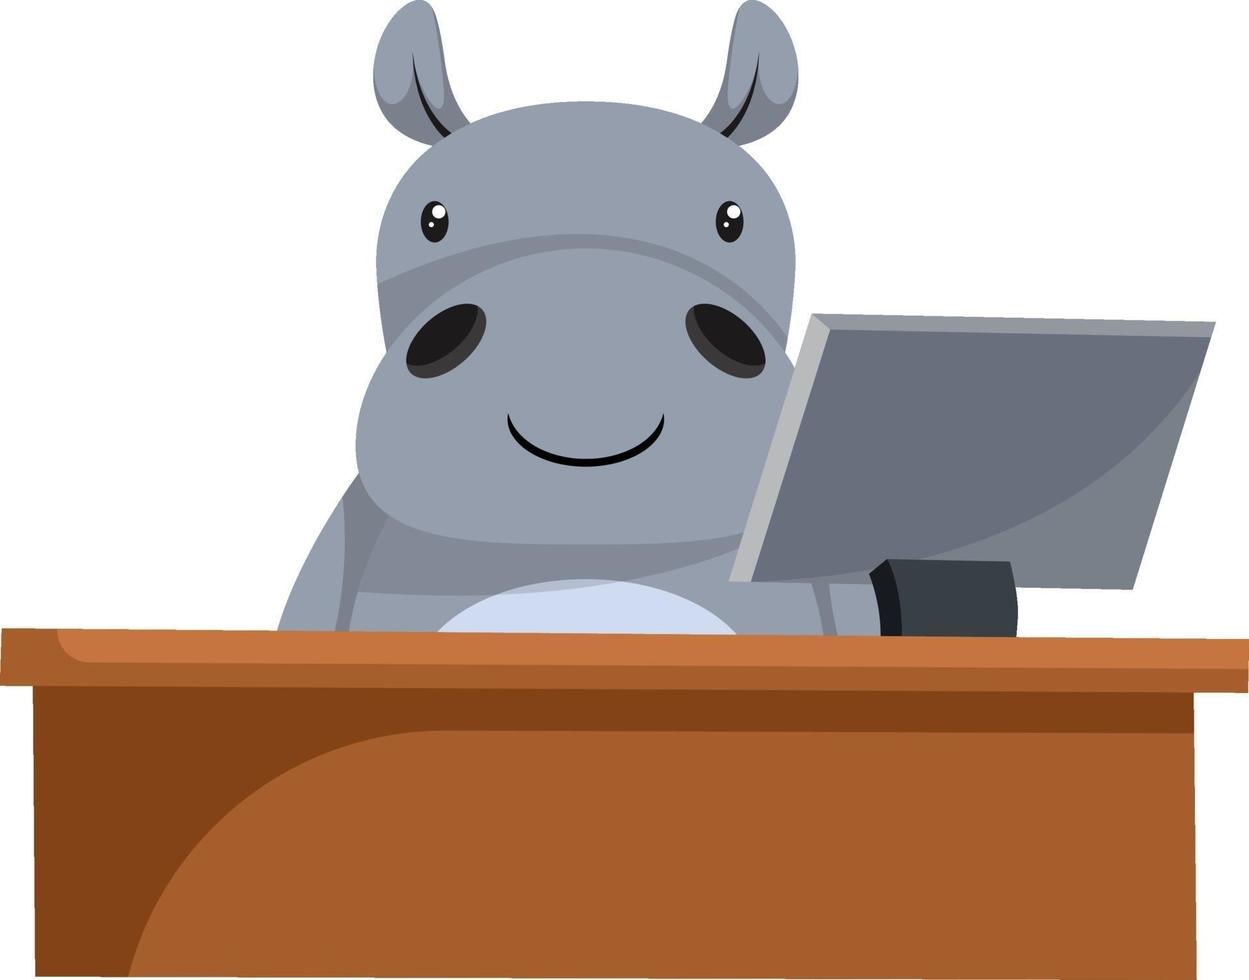 Hippo working, illustration, vector on white background.